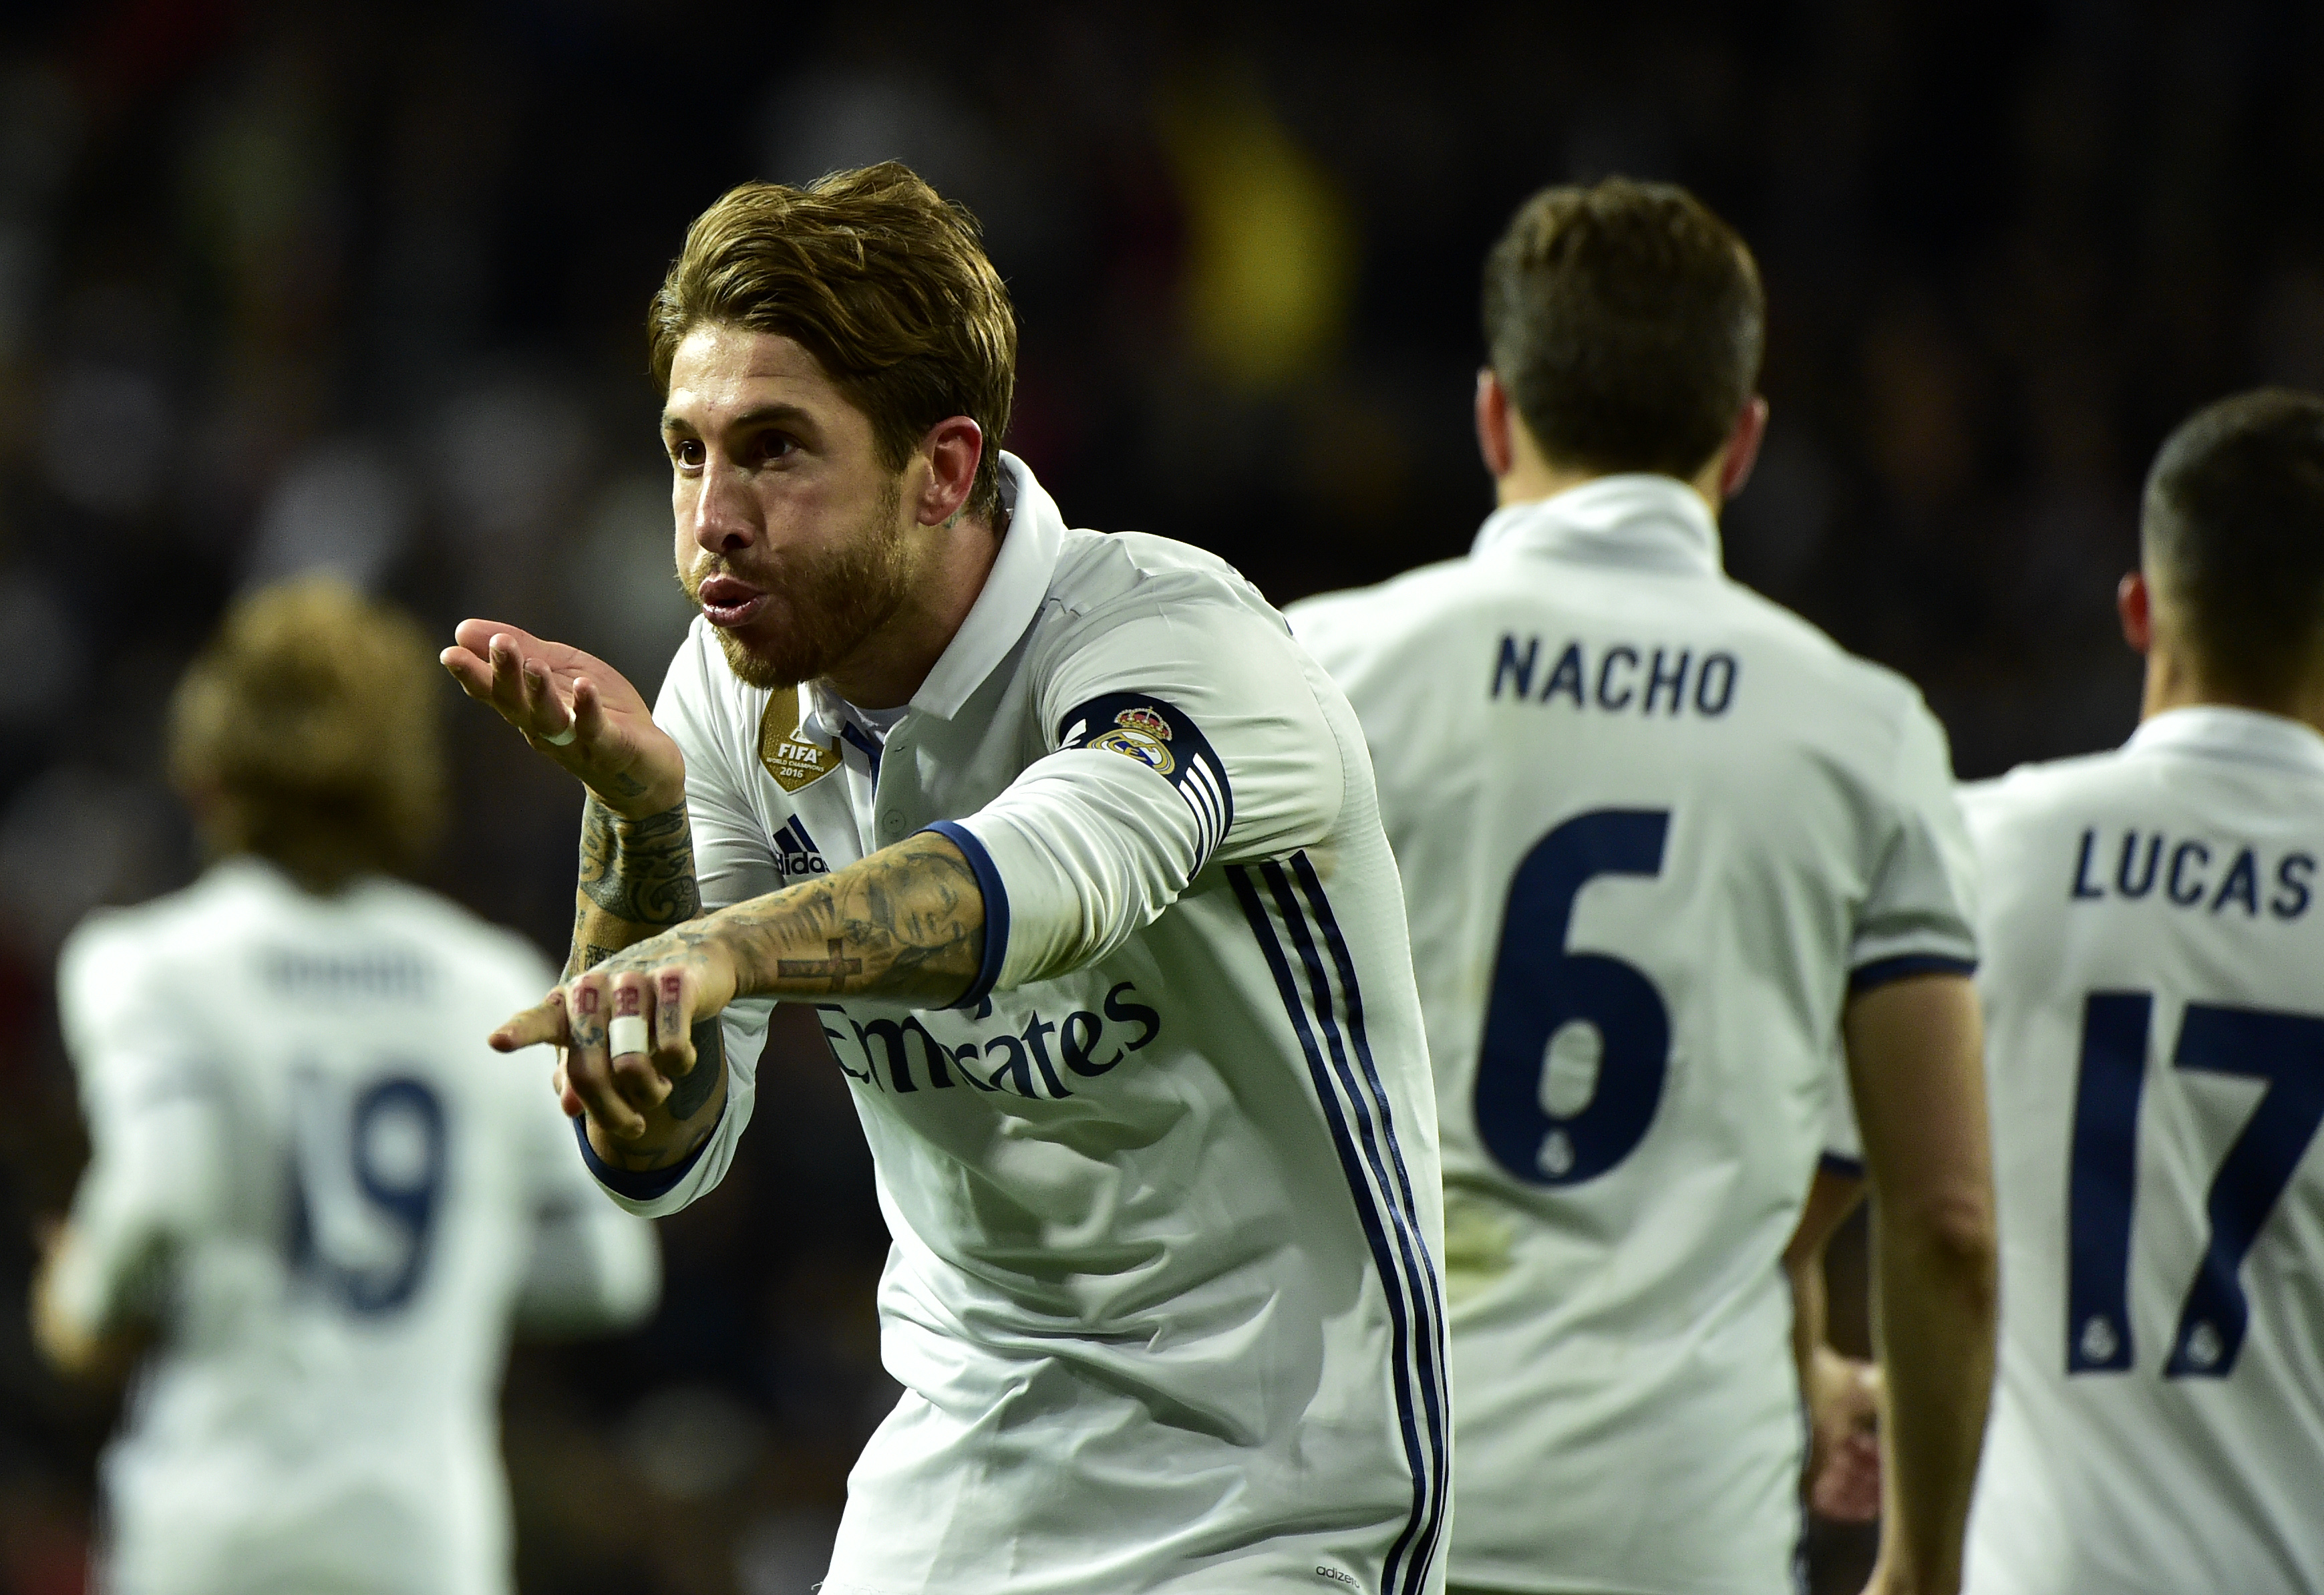 Sergio Ramos' late goals have been vital for Real Madrid this season. (Photo courtesy - Gerard Julien/AFP/Getty Images)